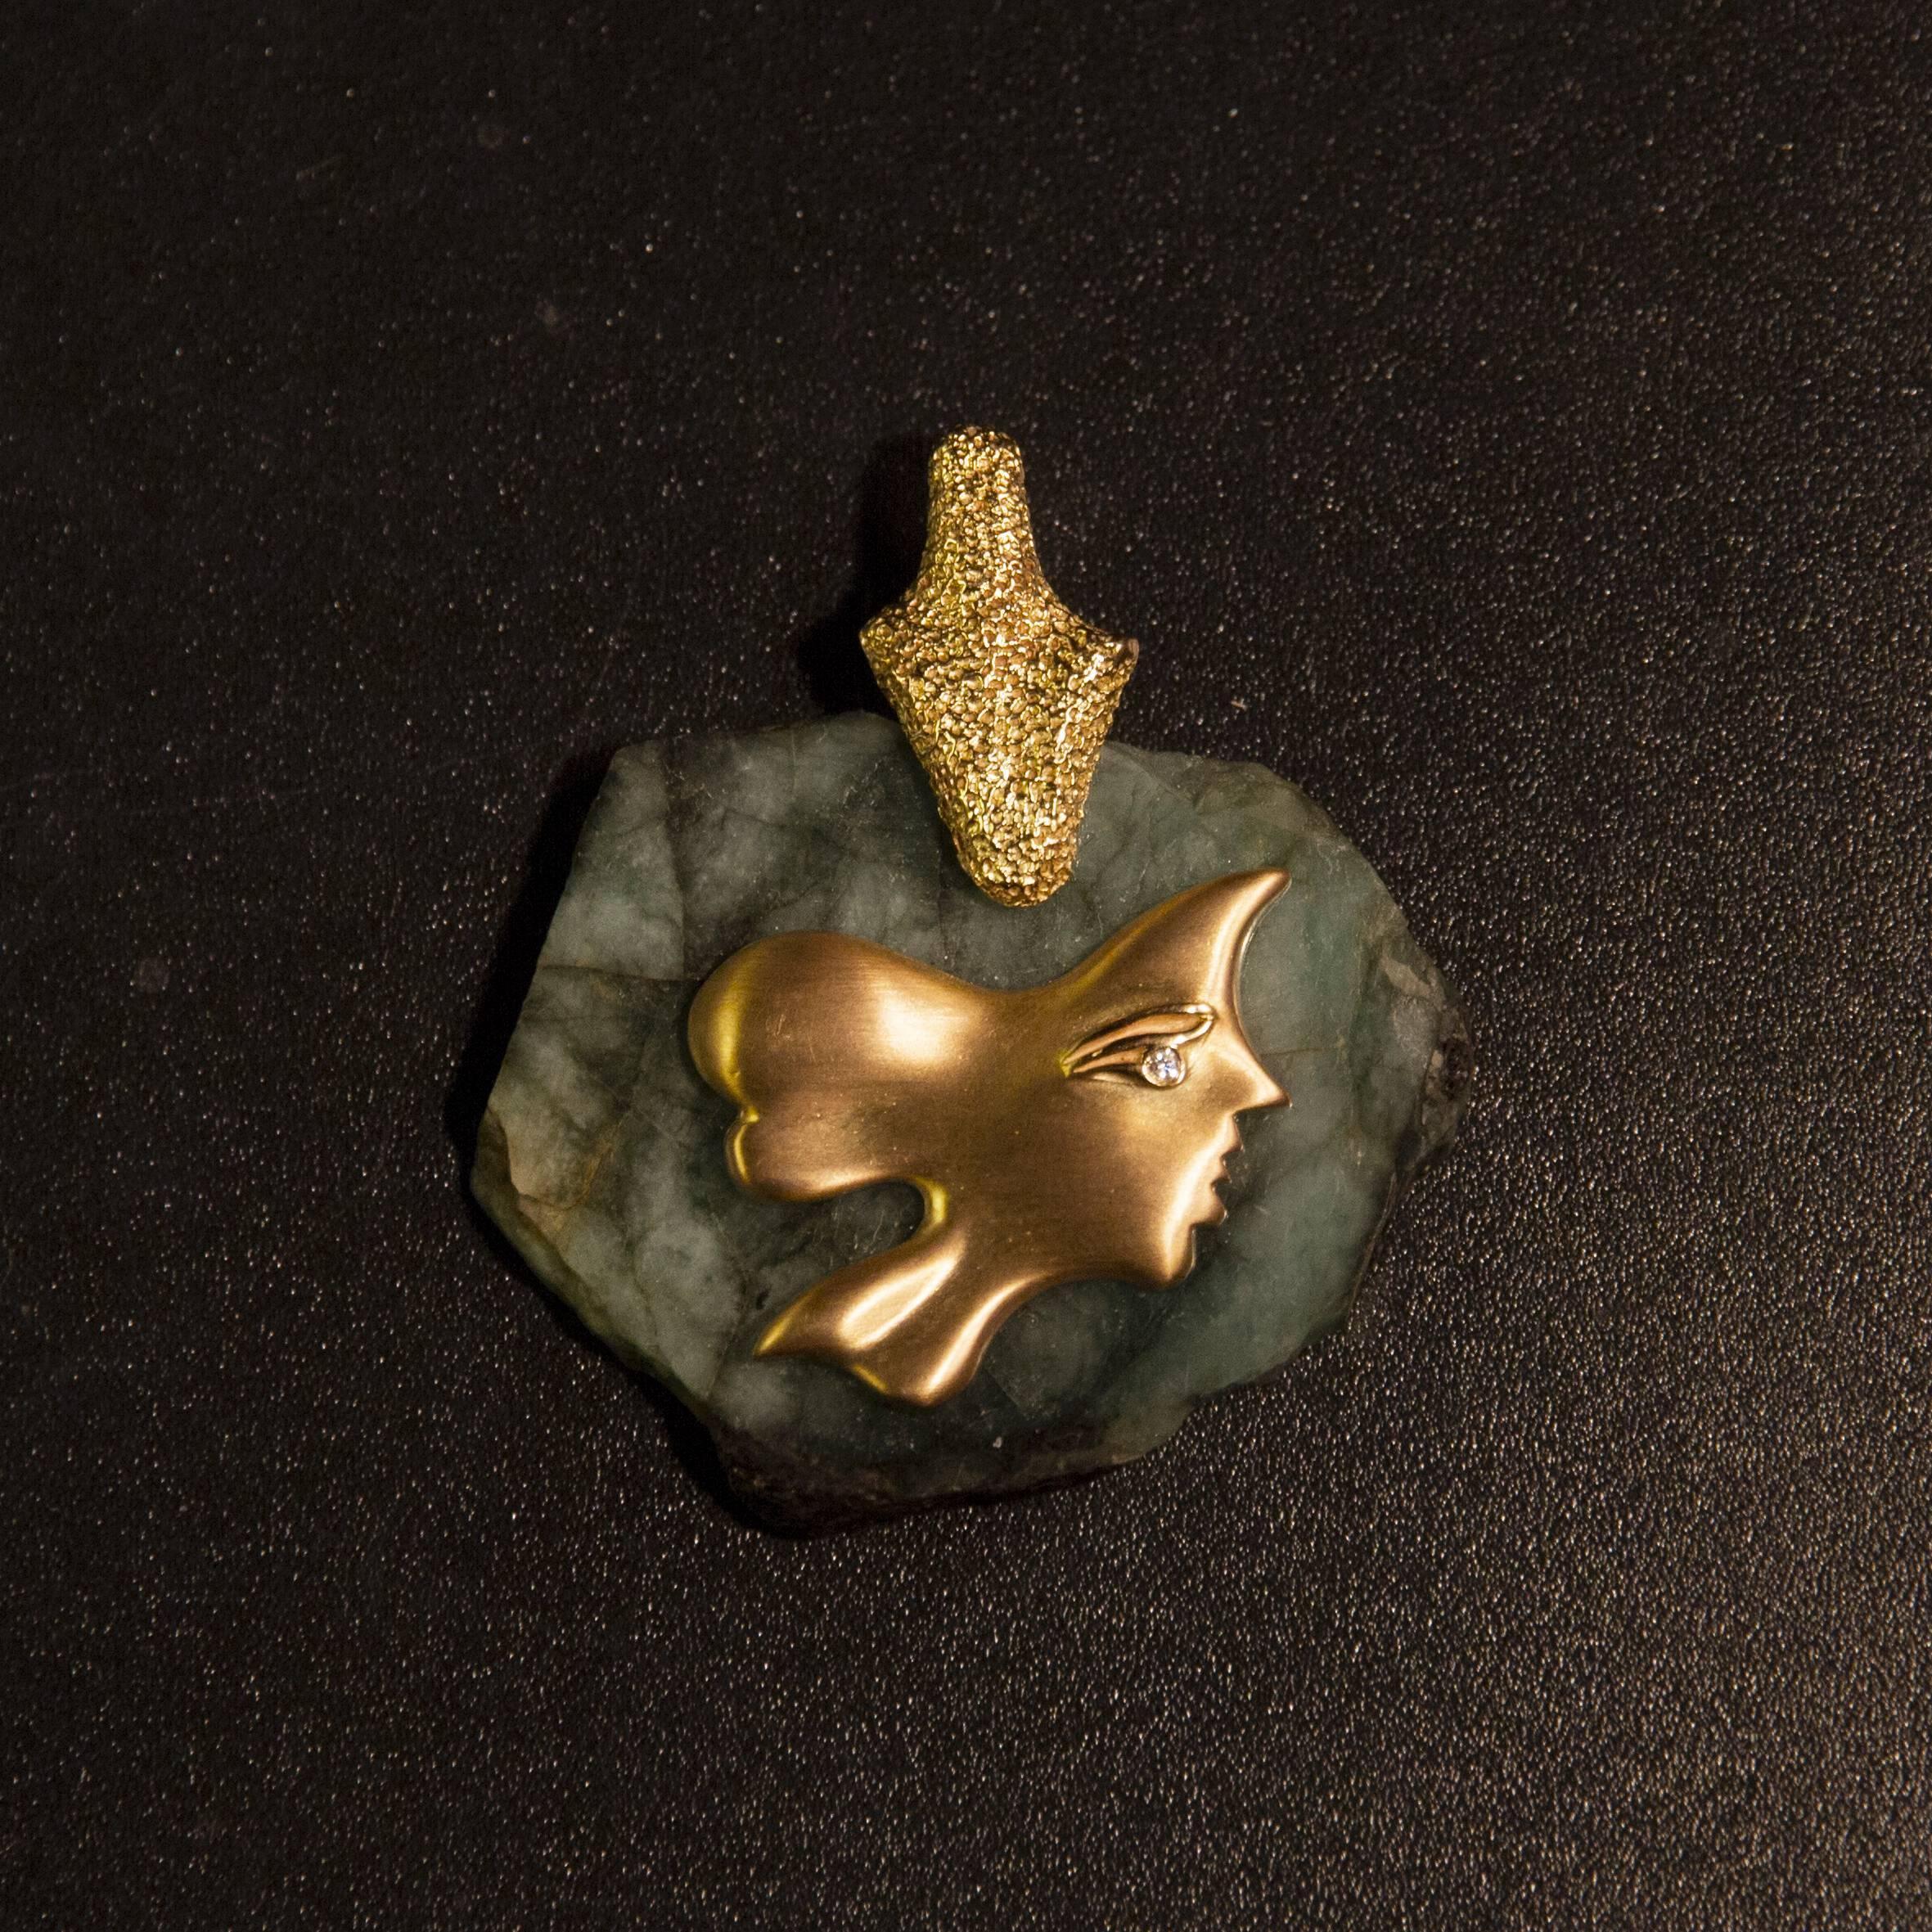 Rare 18K Gold (Marked) & Brilliant Cut Diamond on Emerald (70 cts) Pendant by Georges Braque (1882-1963), inventor of cubism.
It is Signed "Bijoux de Braque" and numbered EA ("Epreuve d'artiste" for artist proof) I/IV.
The